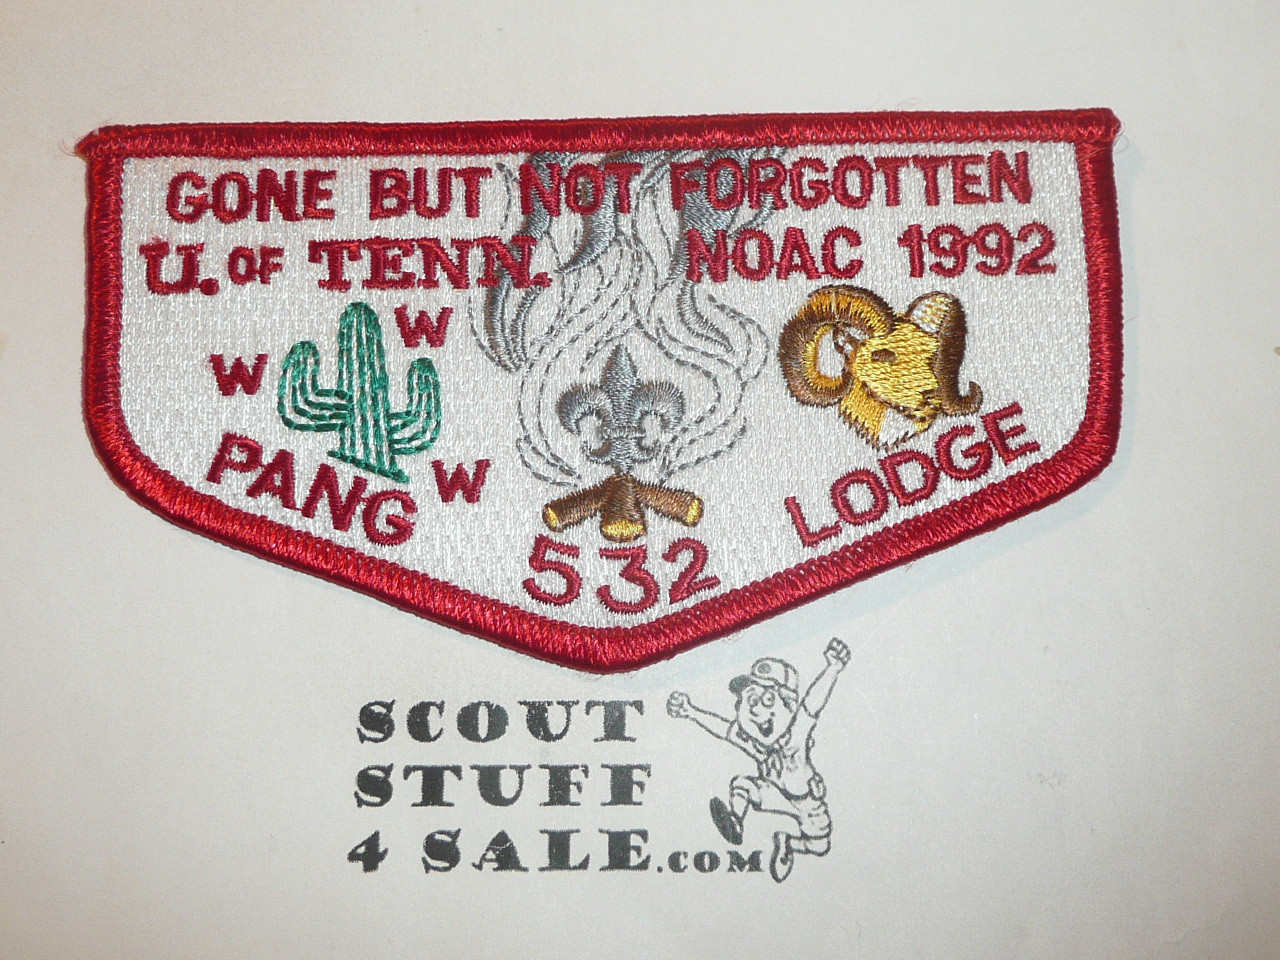 Order of the Arrow Lodge #532 Pang s19 1992 NOAC Flap Patch